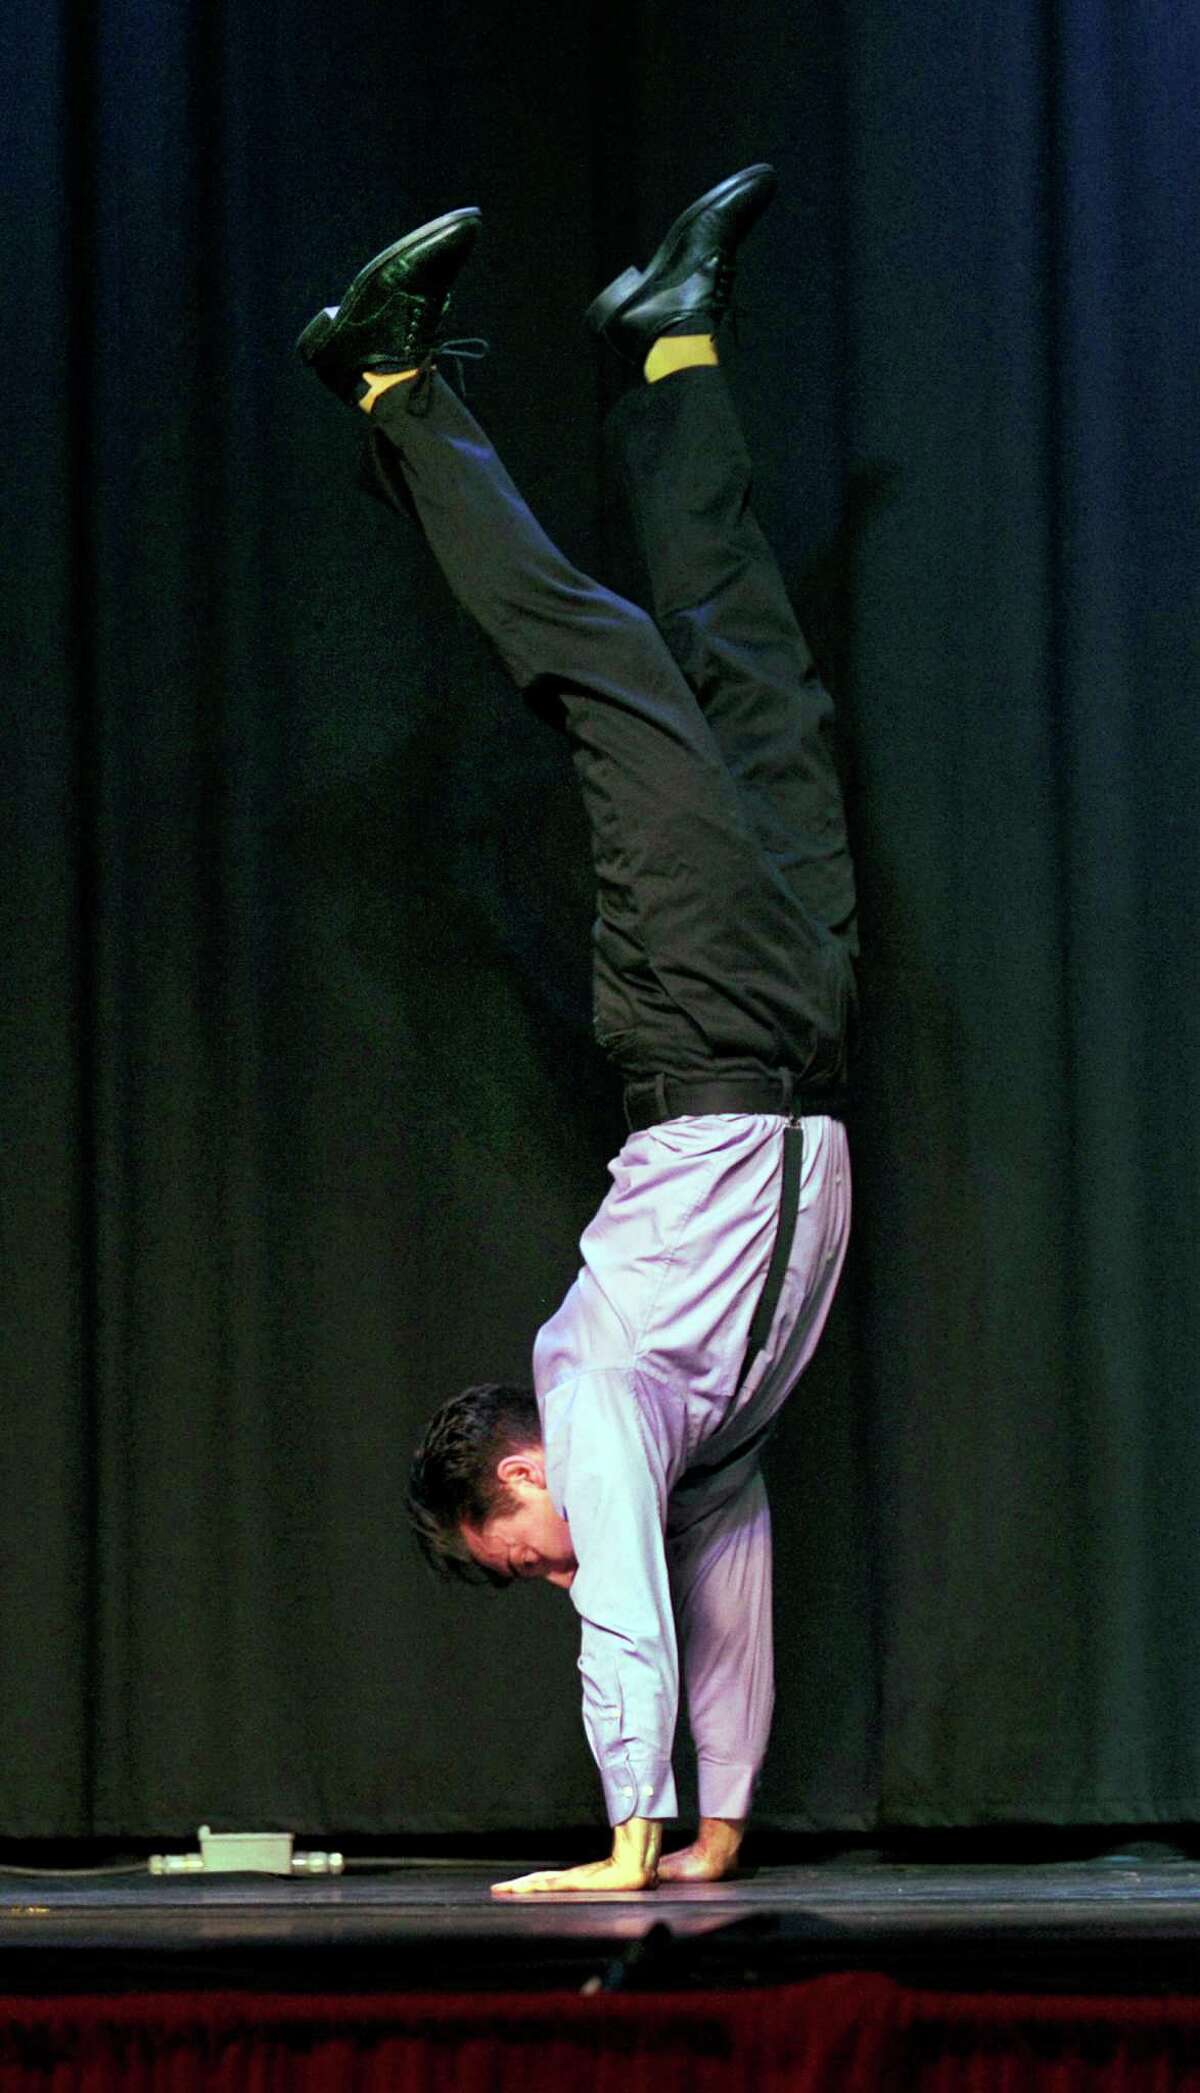 State Representative David Arconti starts his dance number walking on his hands. A local version of "Dancing With the Stars" was held at The Palace Theater on Main Street in Danbury, Conn., Saturday, April 25, 2015 as a fundraiser to benefit Danbury Youth Services.